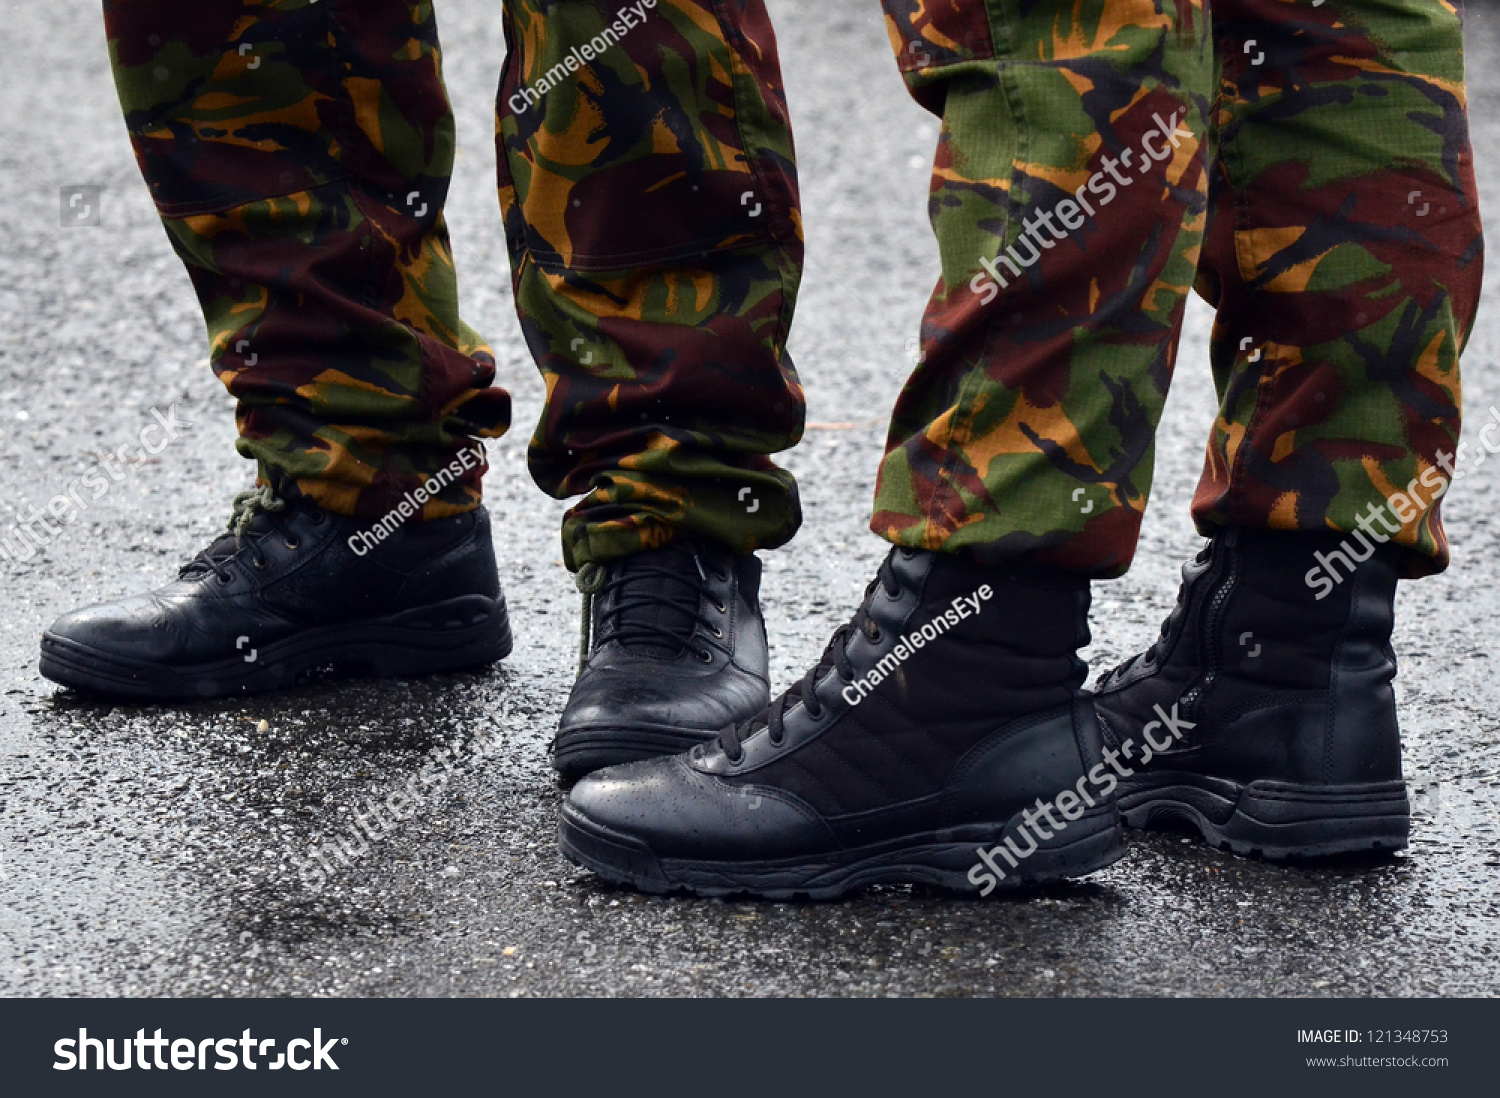 Nz Army Combat Uniform On Soldiers Stock Photo 121348753 - Shutterstock